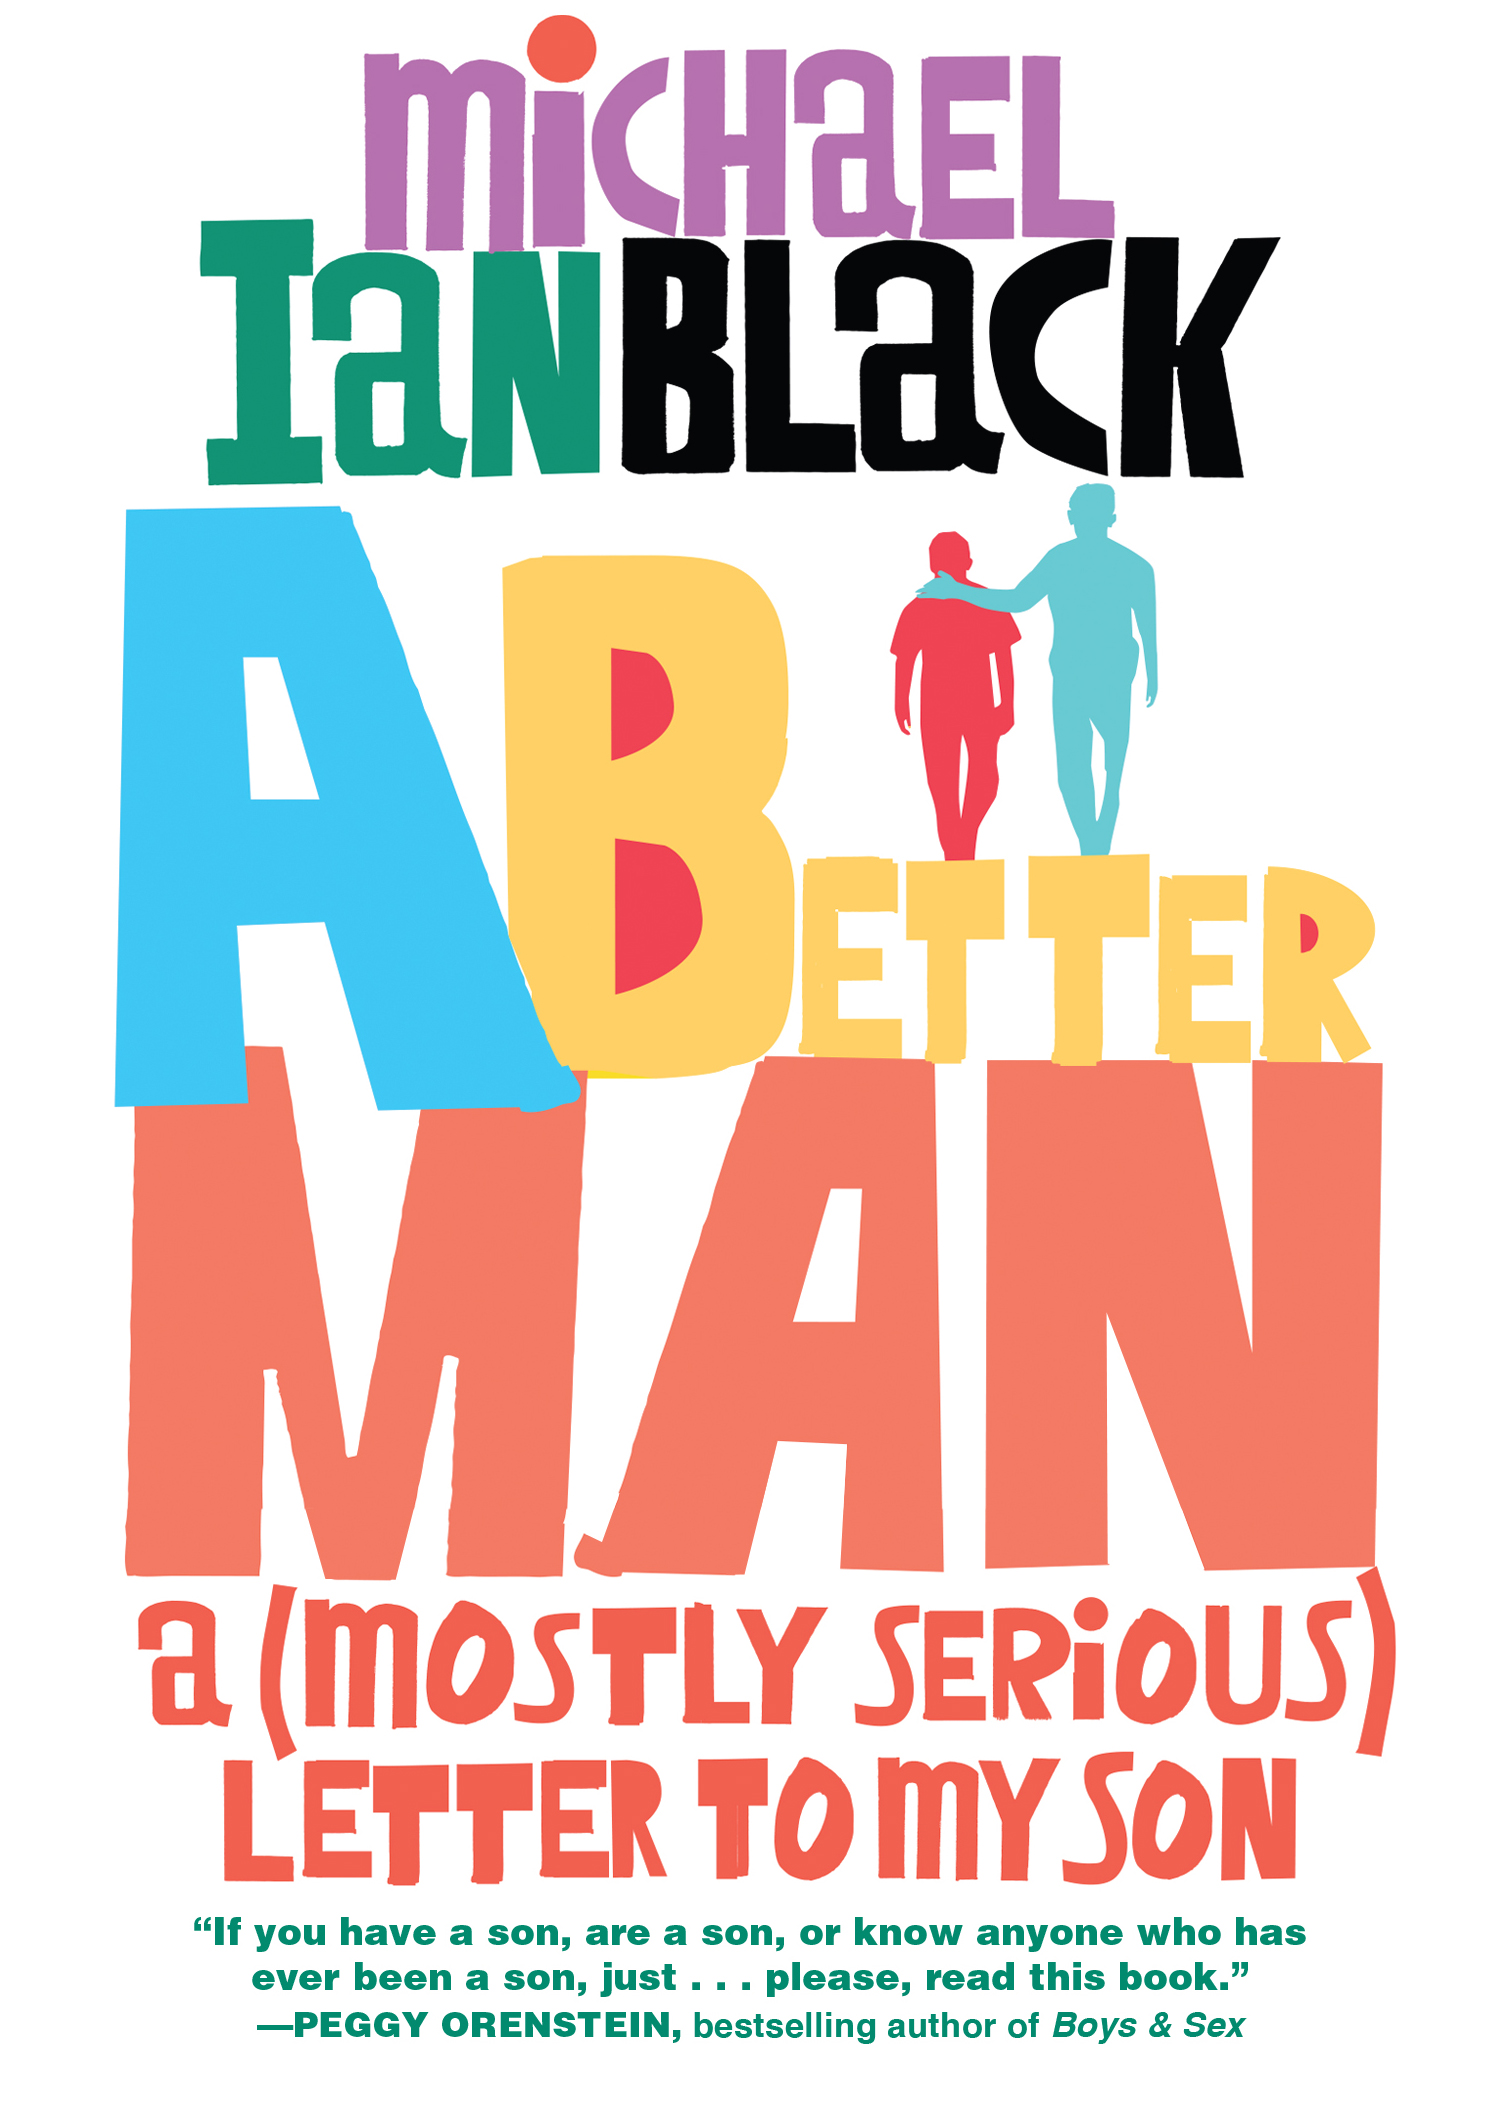 Sleeping Boob Press In Old Man - A Better Man by Michael Ian Black | Hachette Book Group